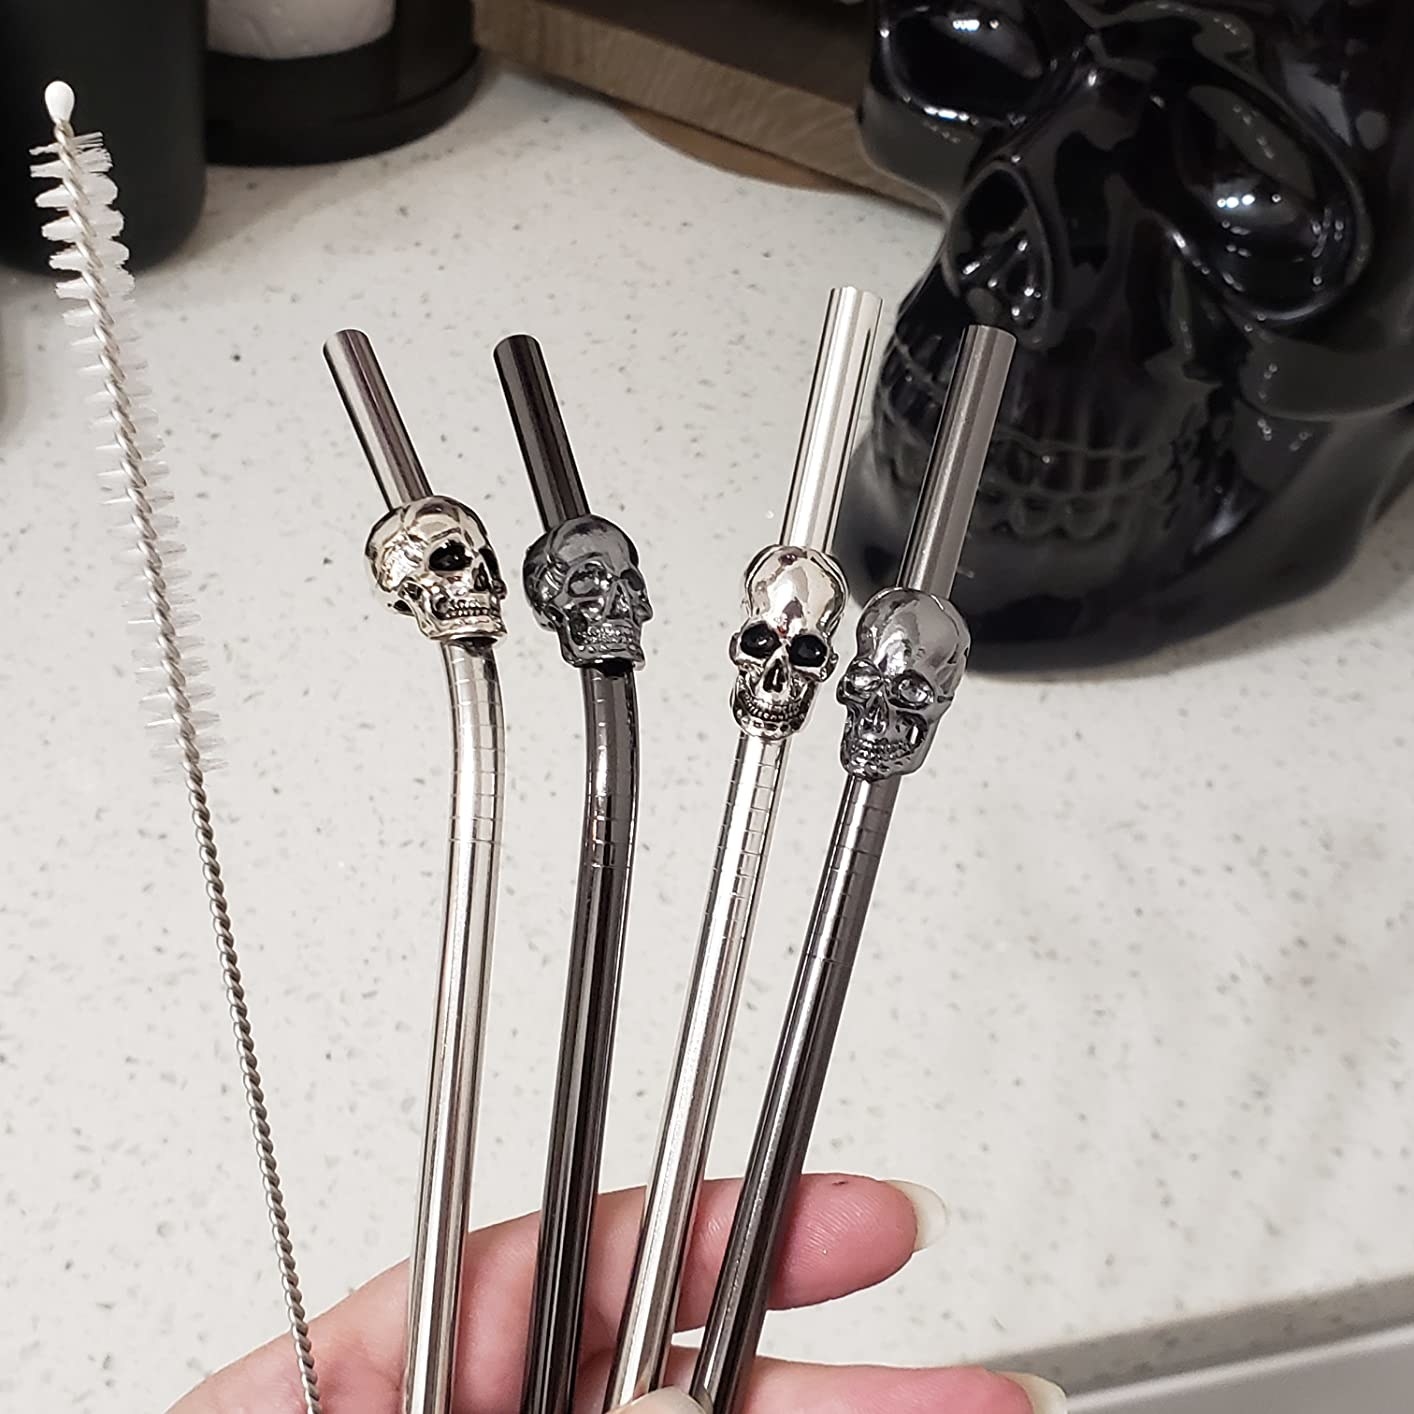 Reviewer holds up four metal reusable skull straws and the cleaner pipe it comes with